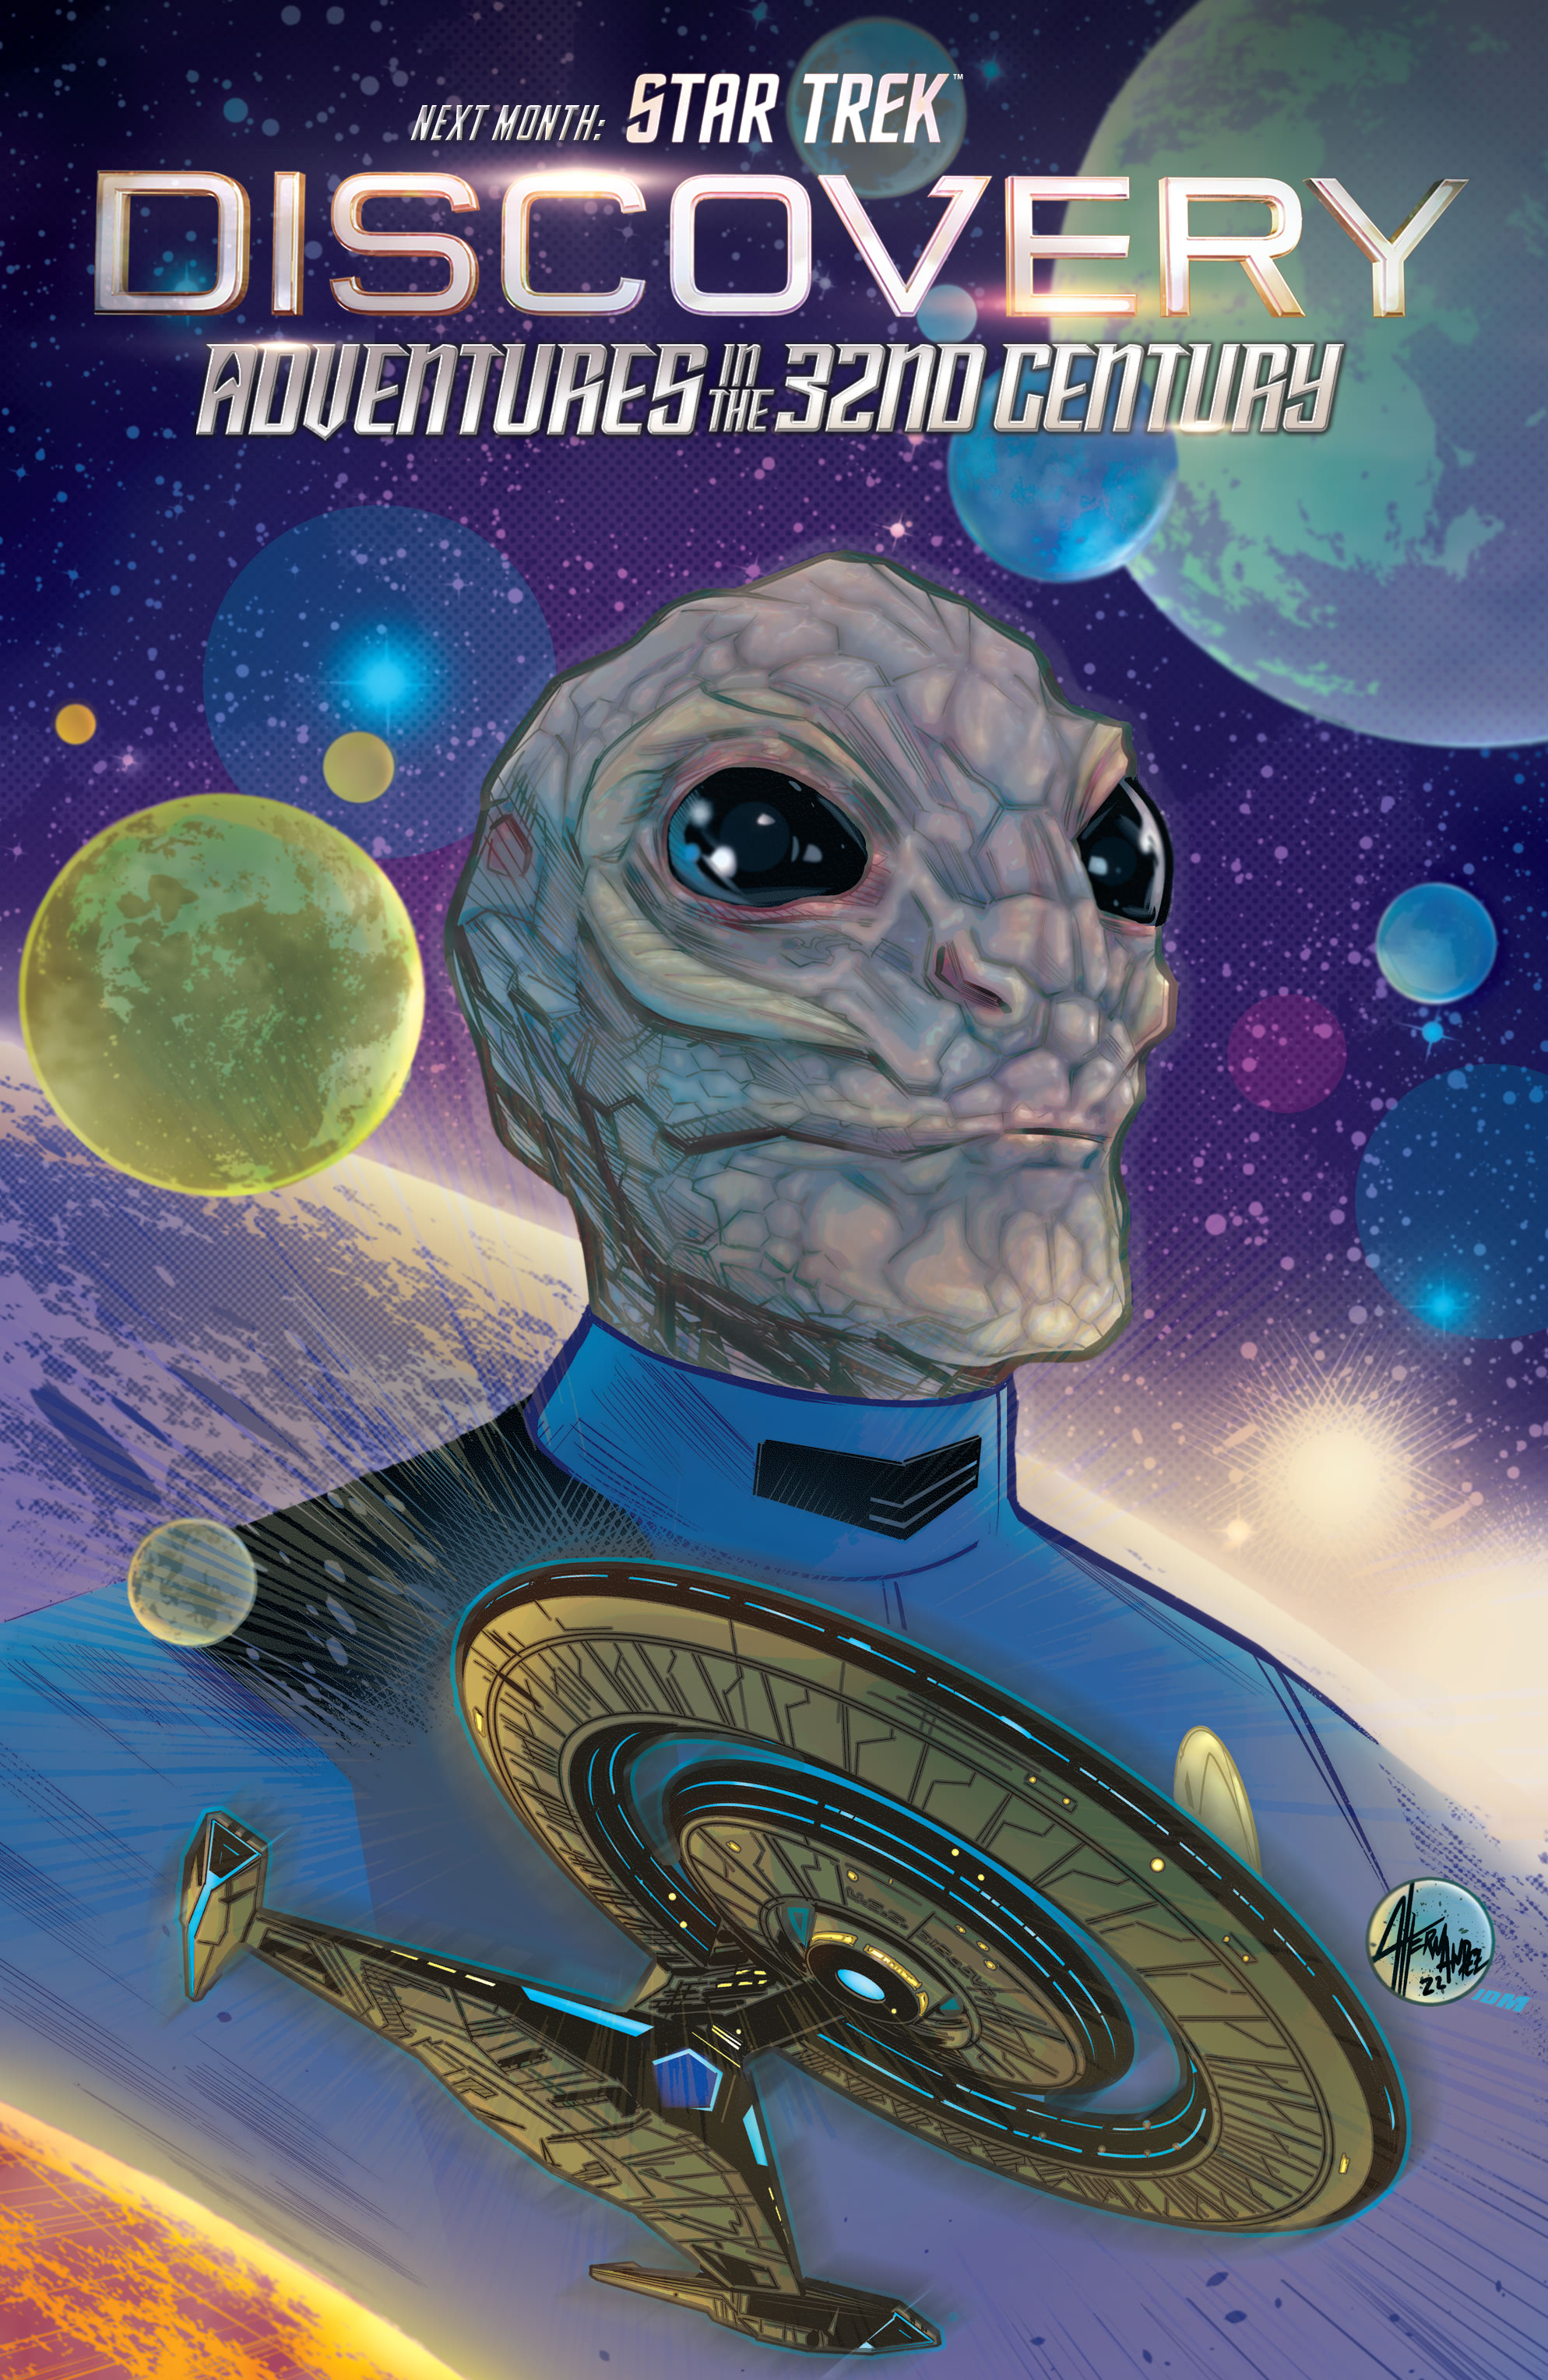 Read online Star Trek: Discovery - Adventures in the 32nd Century comic -  Issue #3 - 23